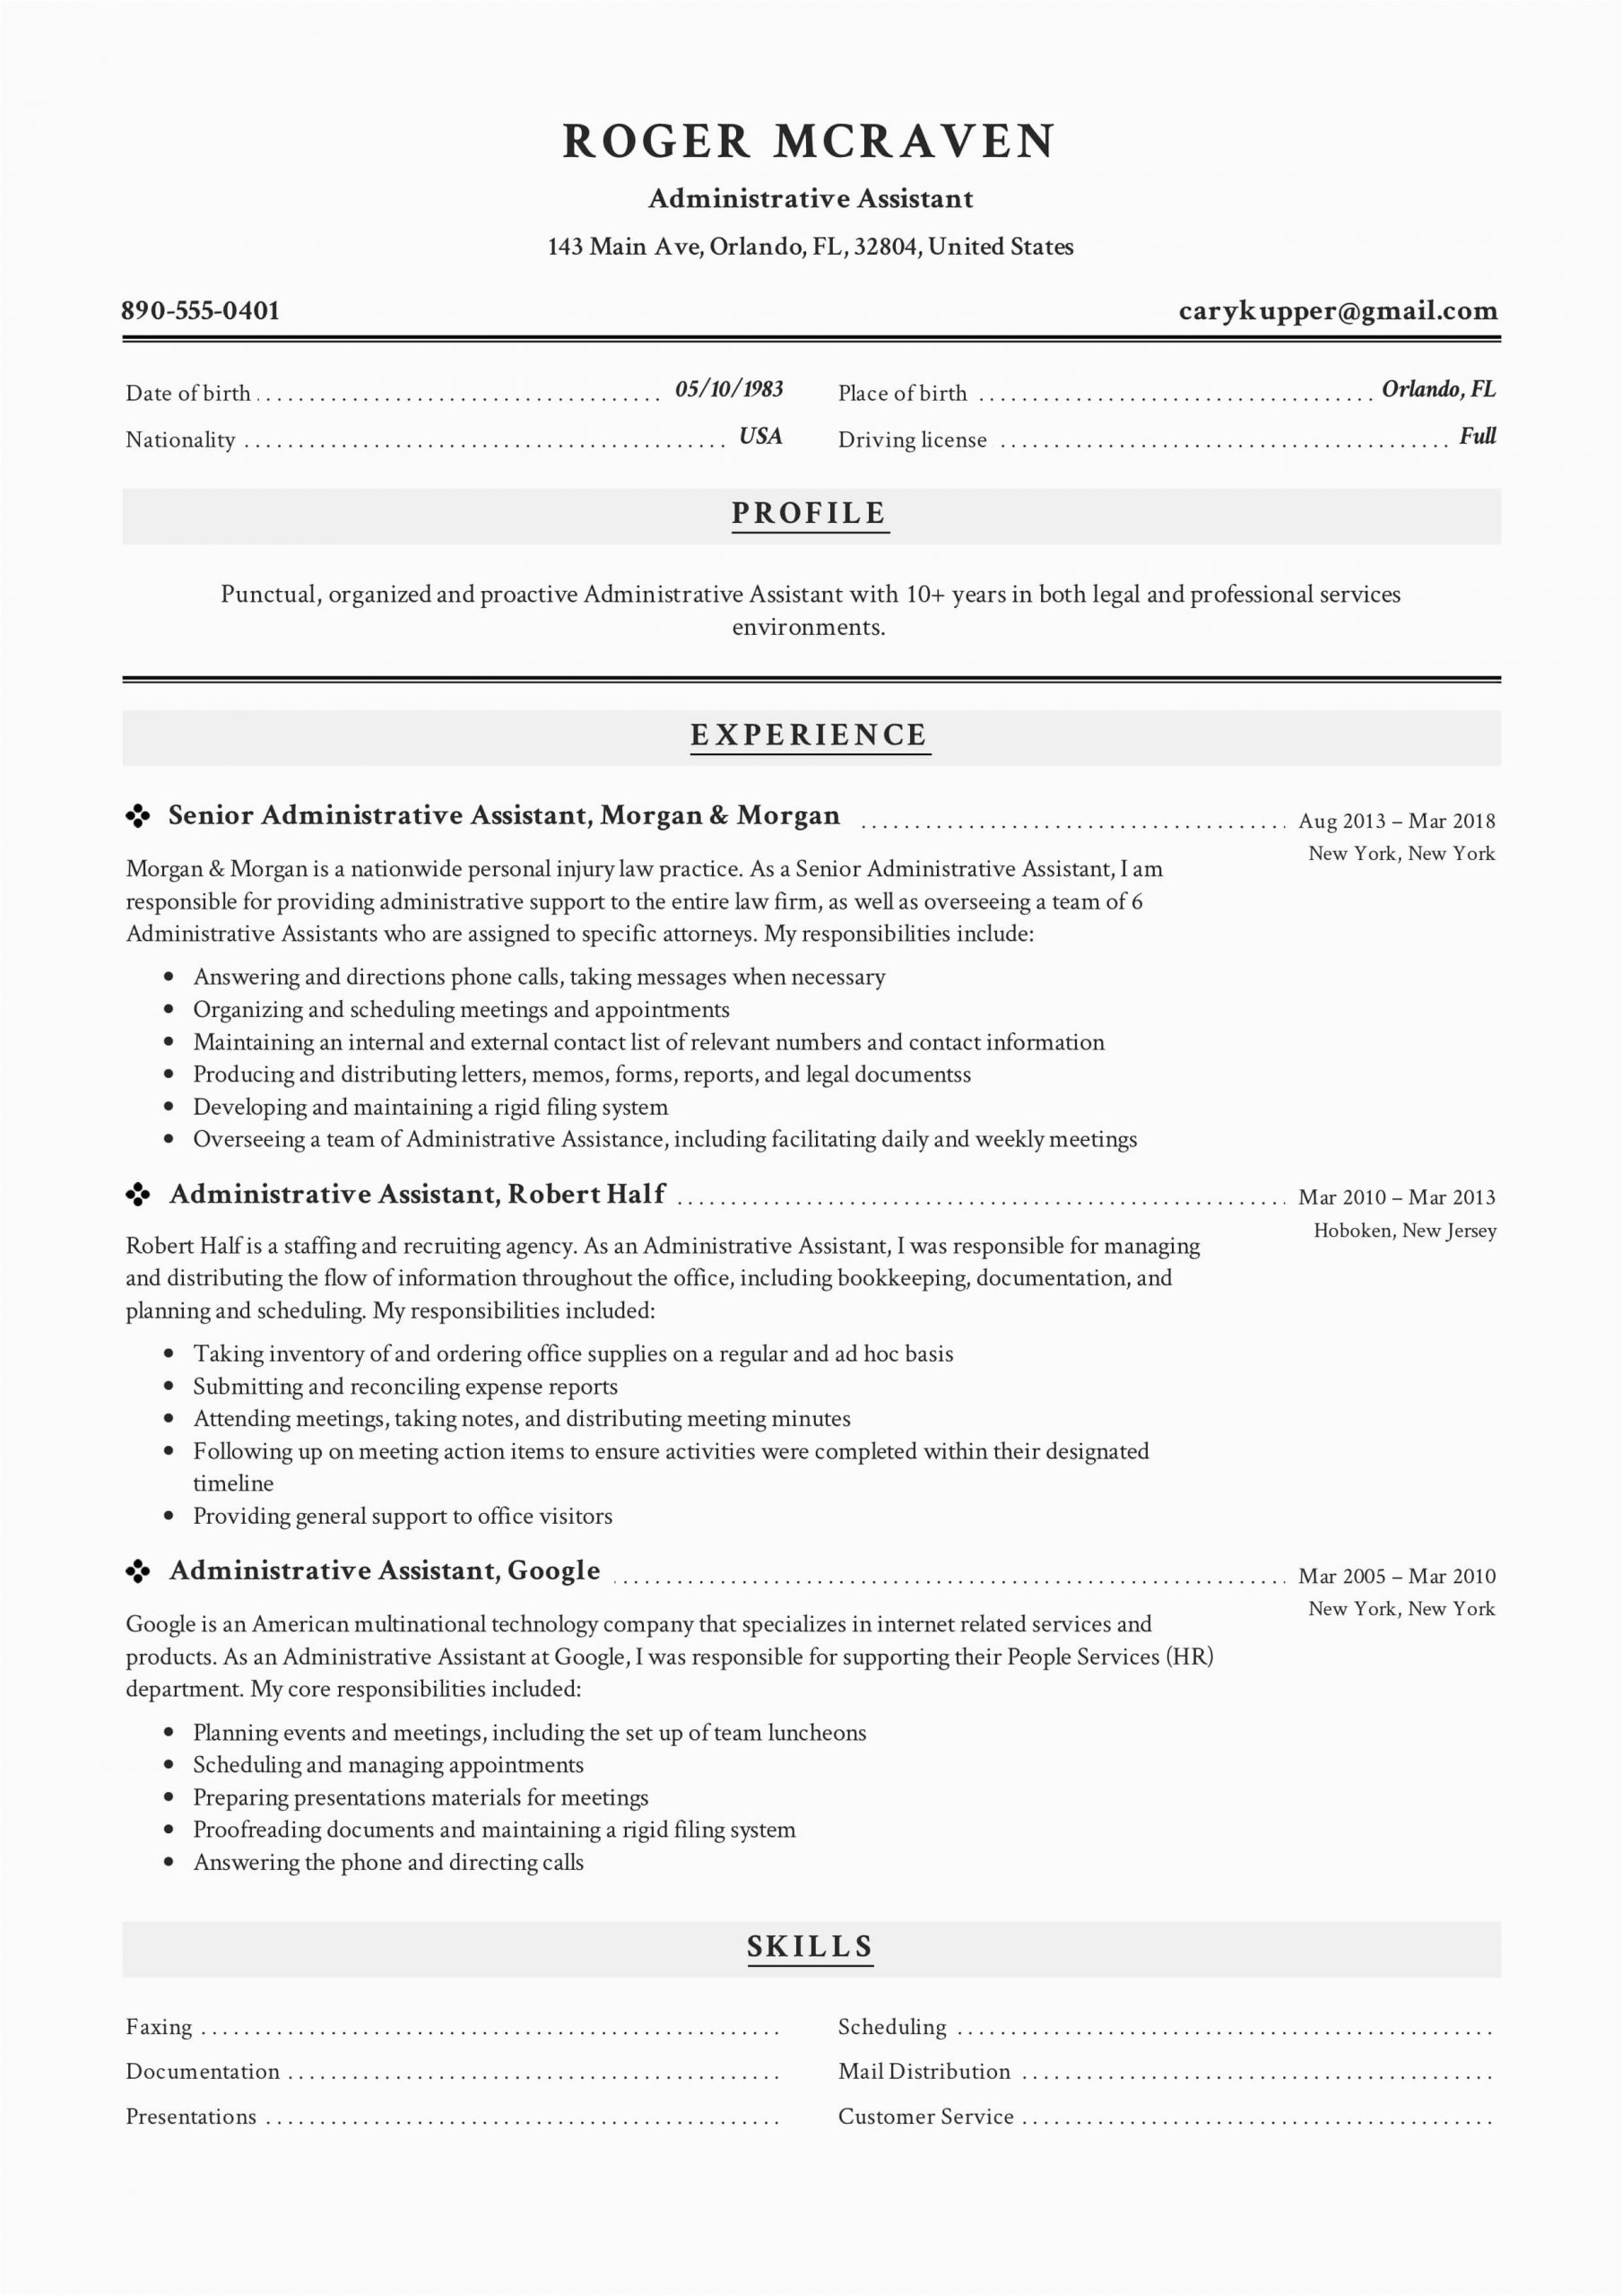 Sample Resumes for Administrative assistant Positions 12 13 Administrative assistant Resume Sample